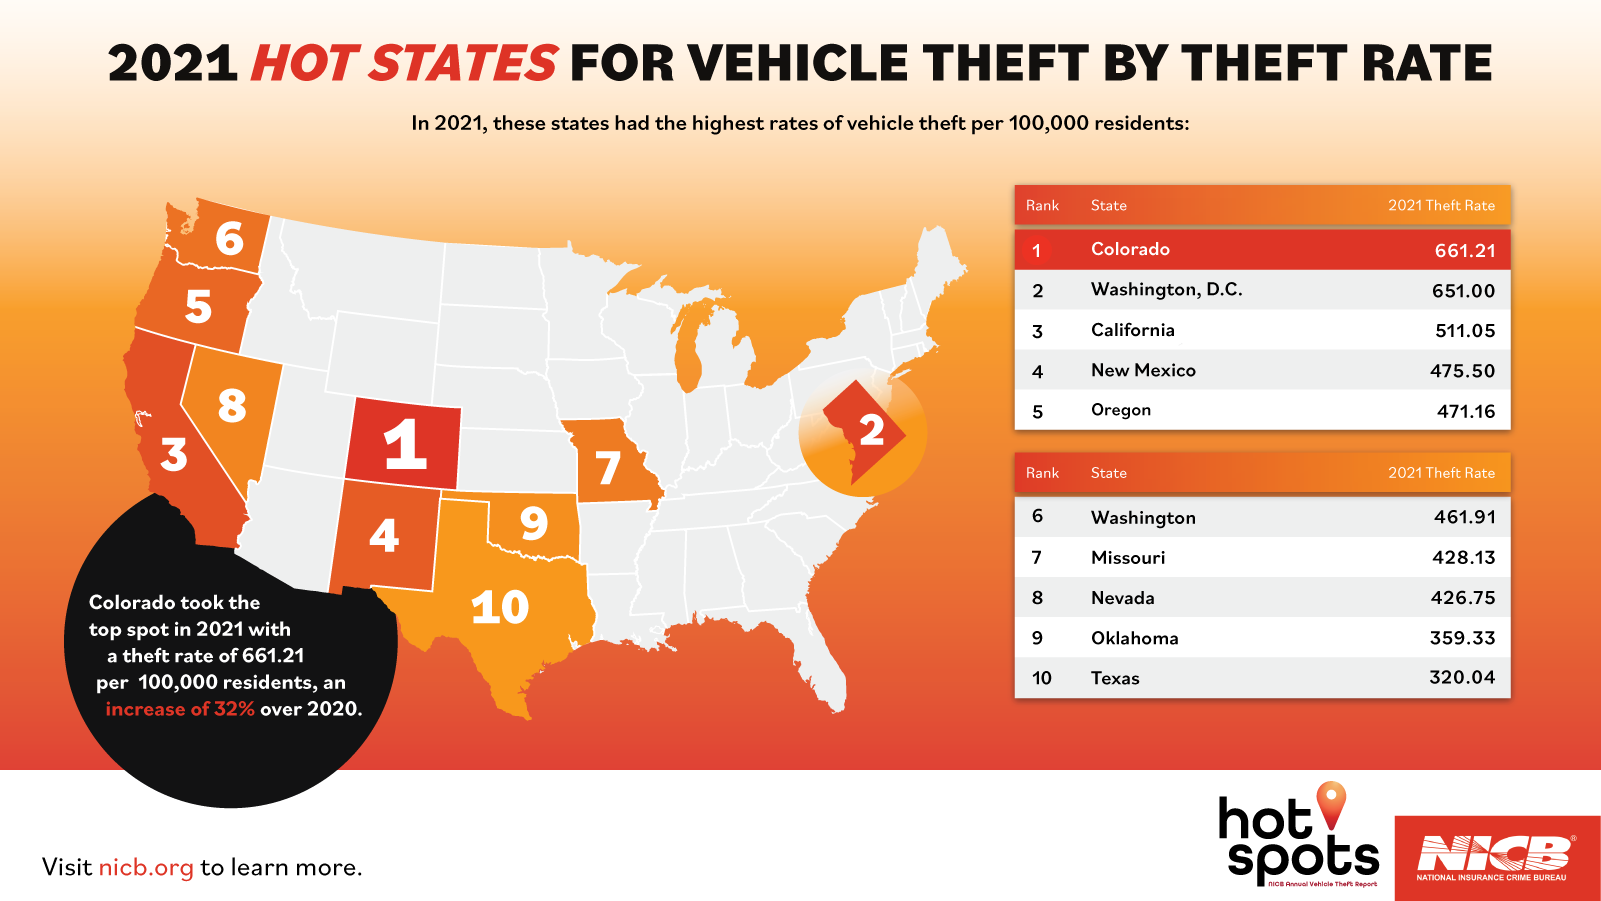 2021 Hot States for Vehicle Theft by Theft Rate